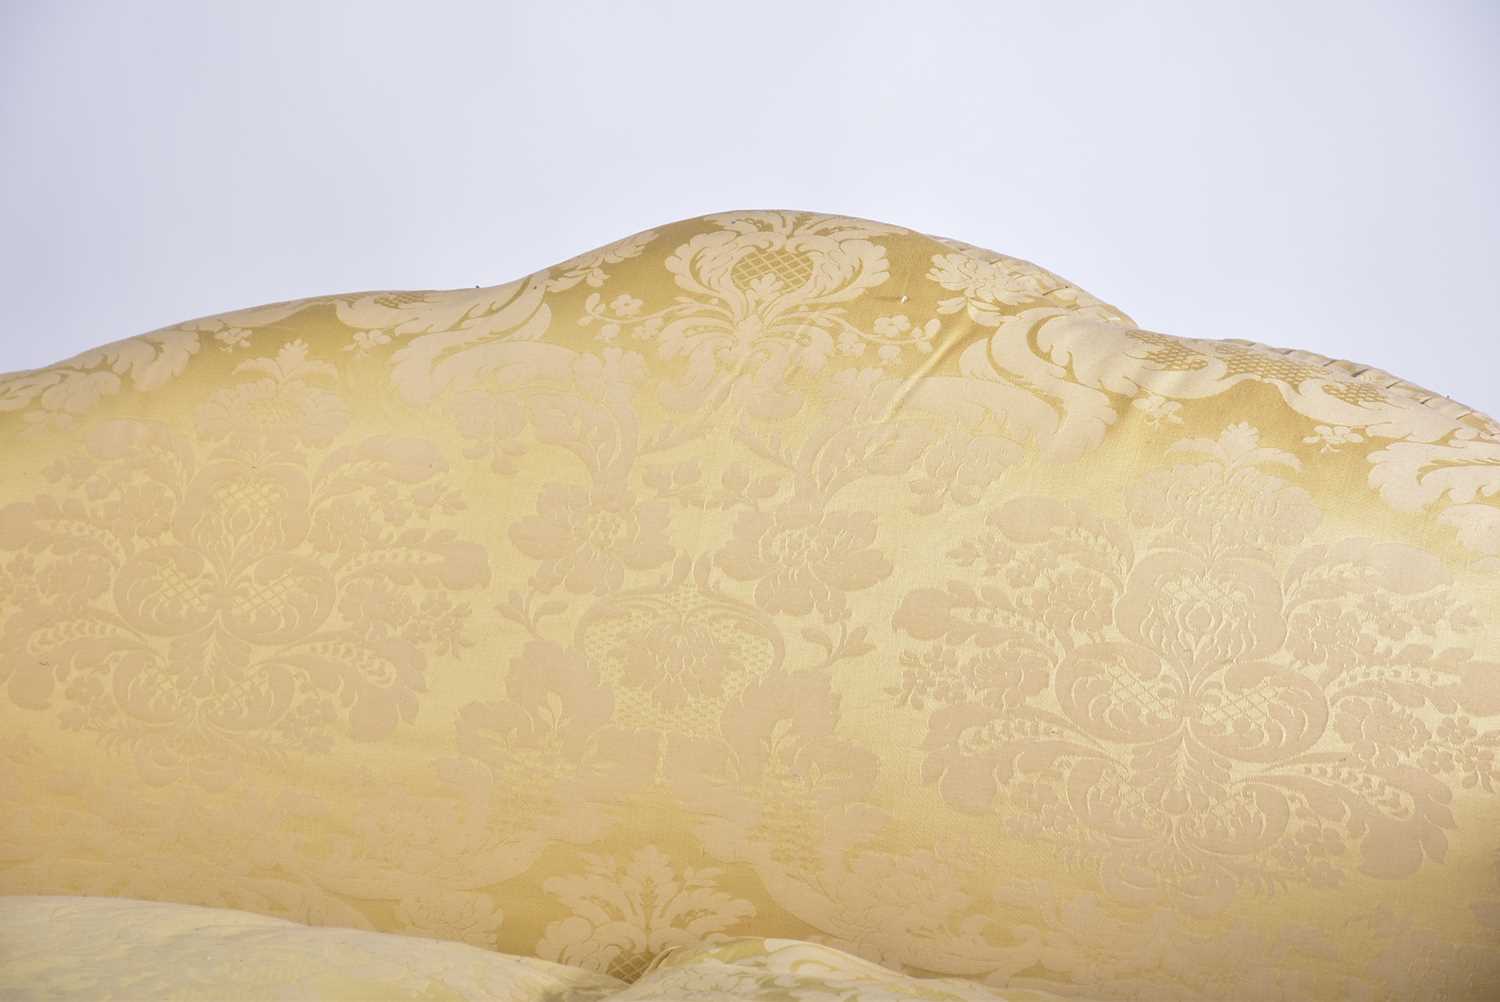 A pair of Harrods camel back two-seat sofas with stuff over pale gold Damask upholstery with - Image 6 of 12